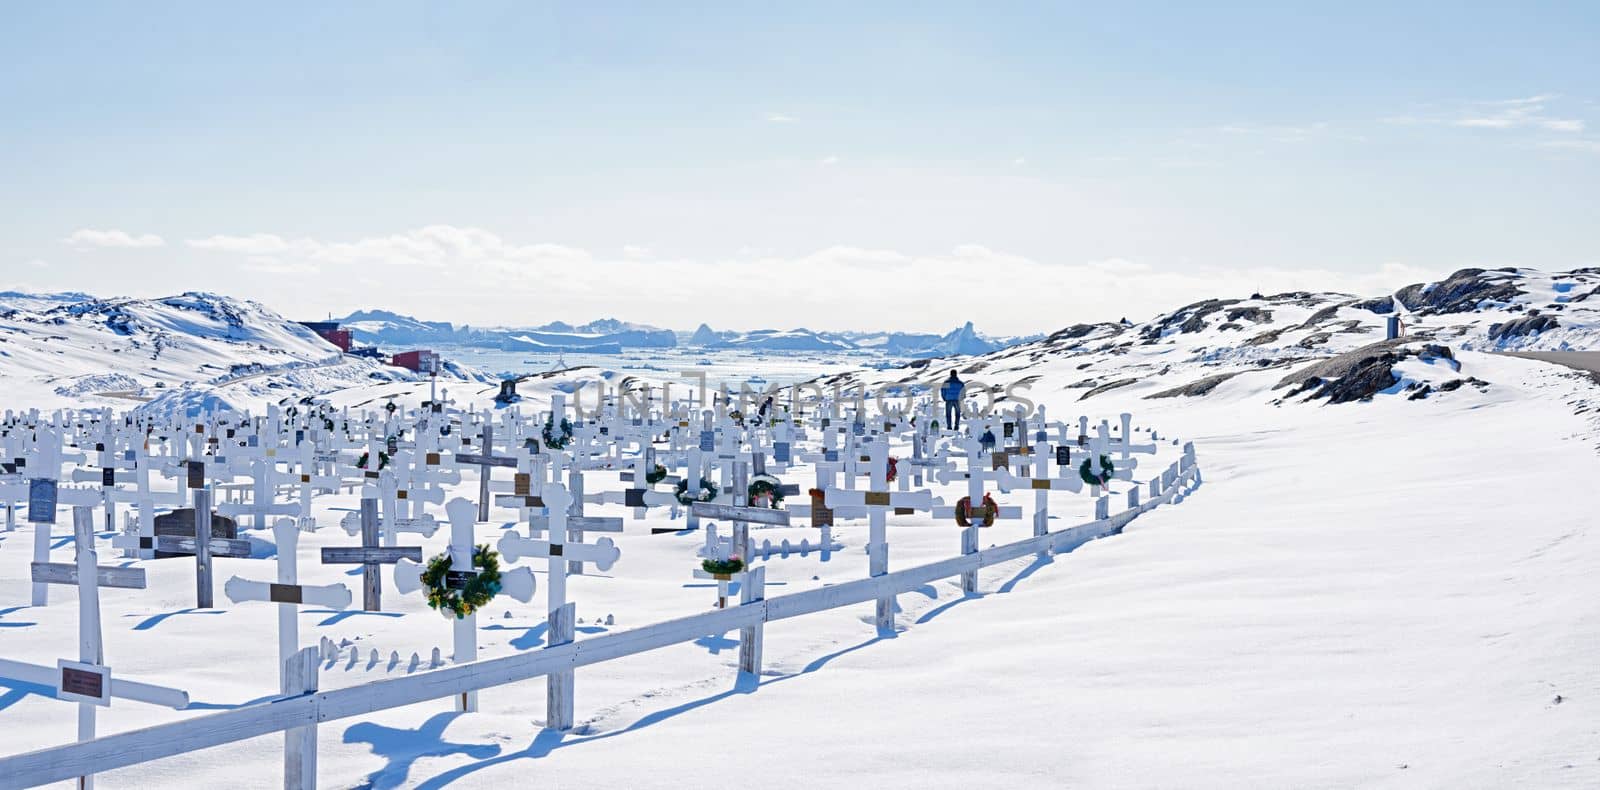 Greenland - beauty of the North. A photo of a churchyard outside Ilulissat, Greenland, DenmarkA photo of a public churchyard outside Ilulissat, Greenland, Denmark